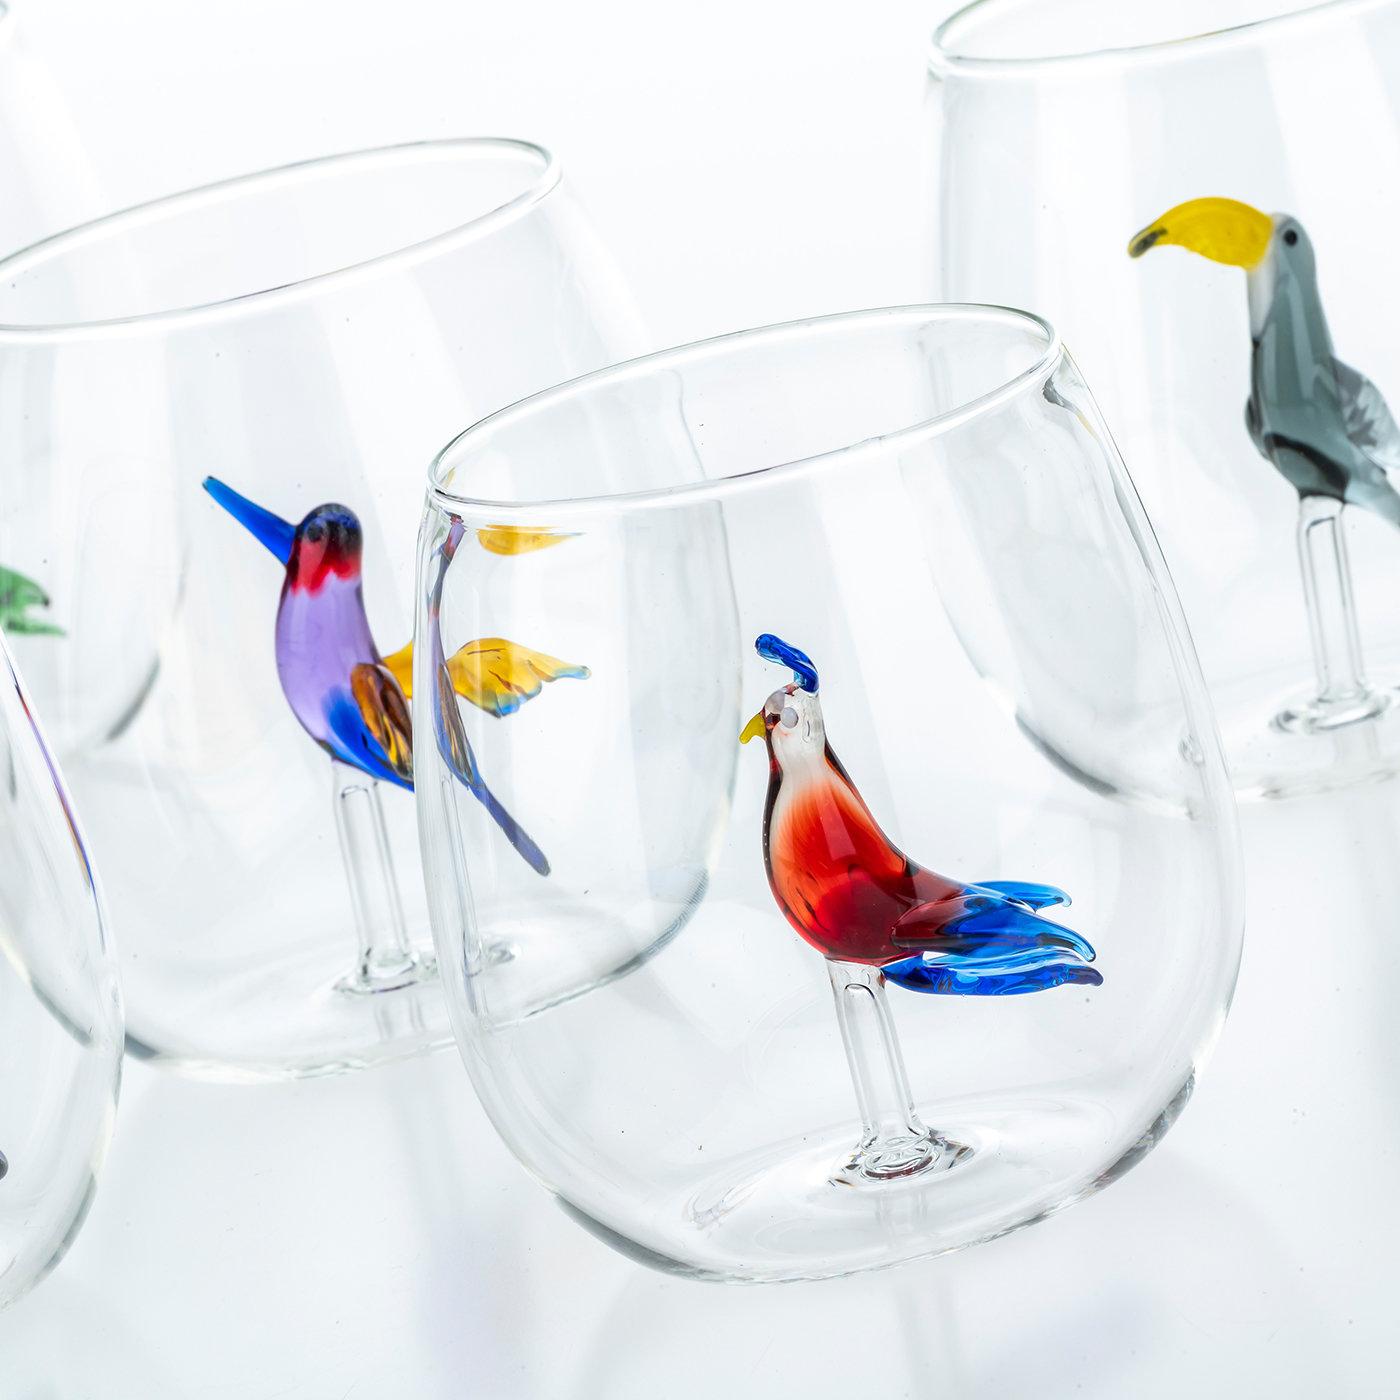 Featuring six tumblers (10 H. x 8 ⌀ cm) in blown glass, this refined set of six pieces makes a strikingly simple yet dynamic addition to any table setting. Part of a collection inspired by the colorful and vibrant nature of tropical islands, each